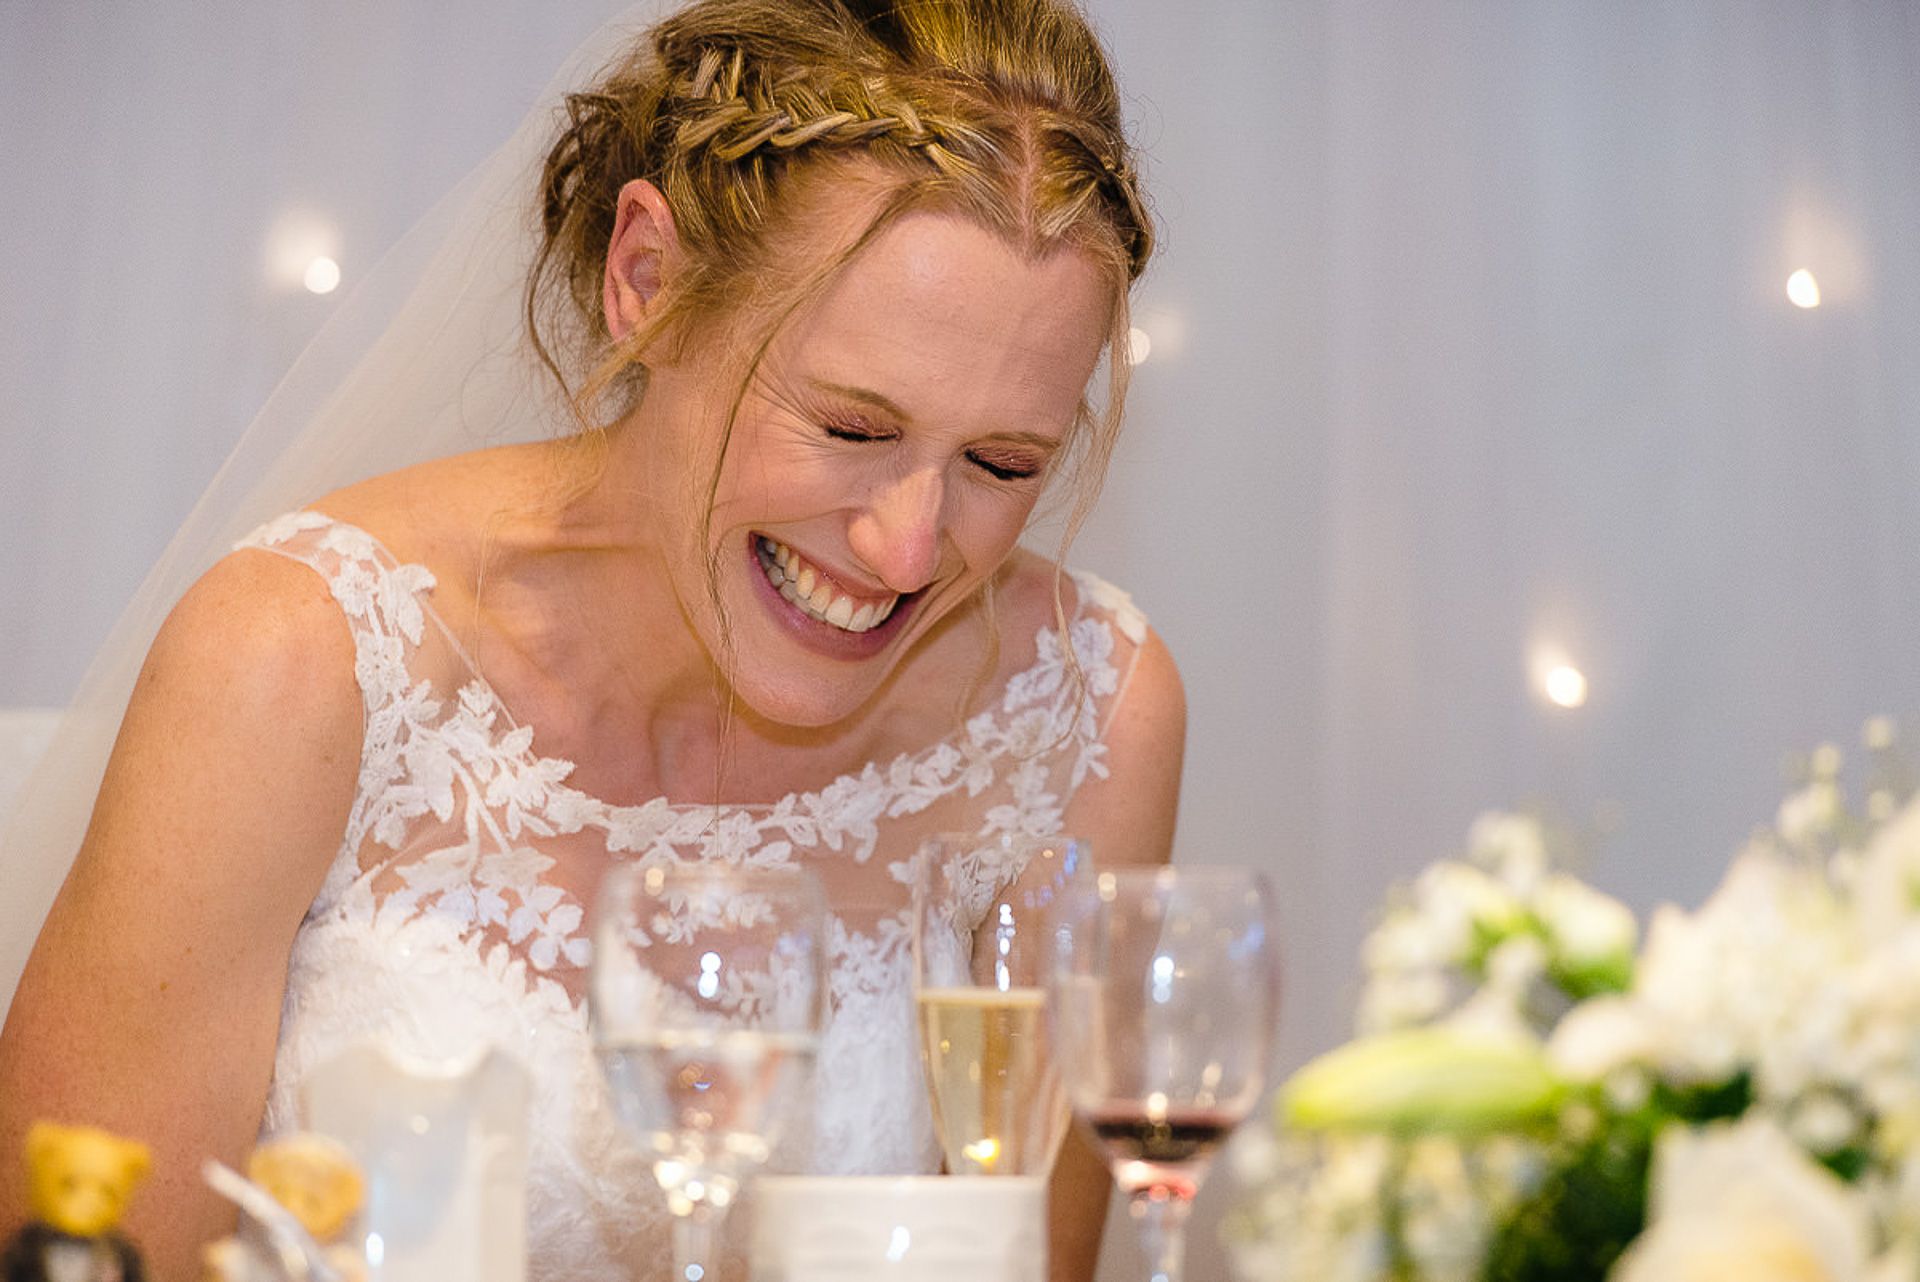 brides laughs at the speech her husband is making